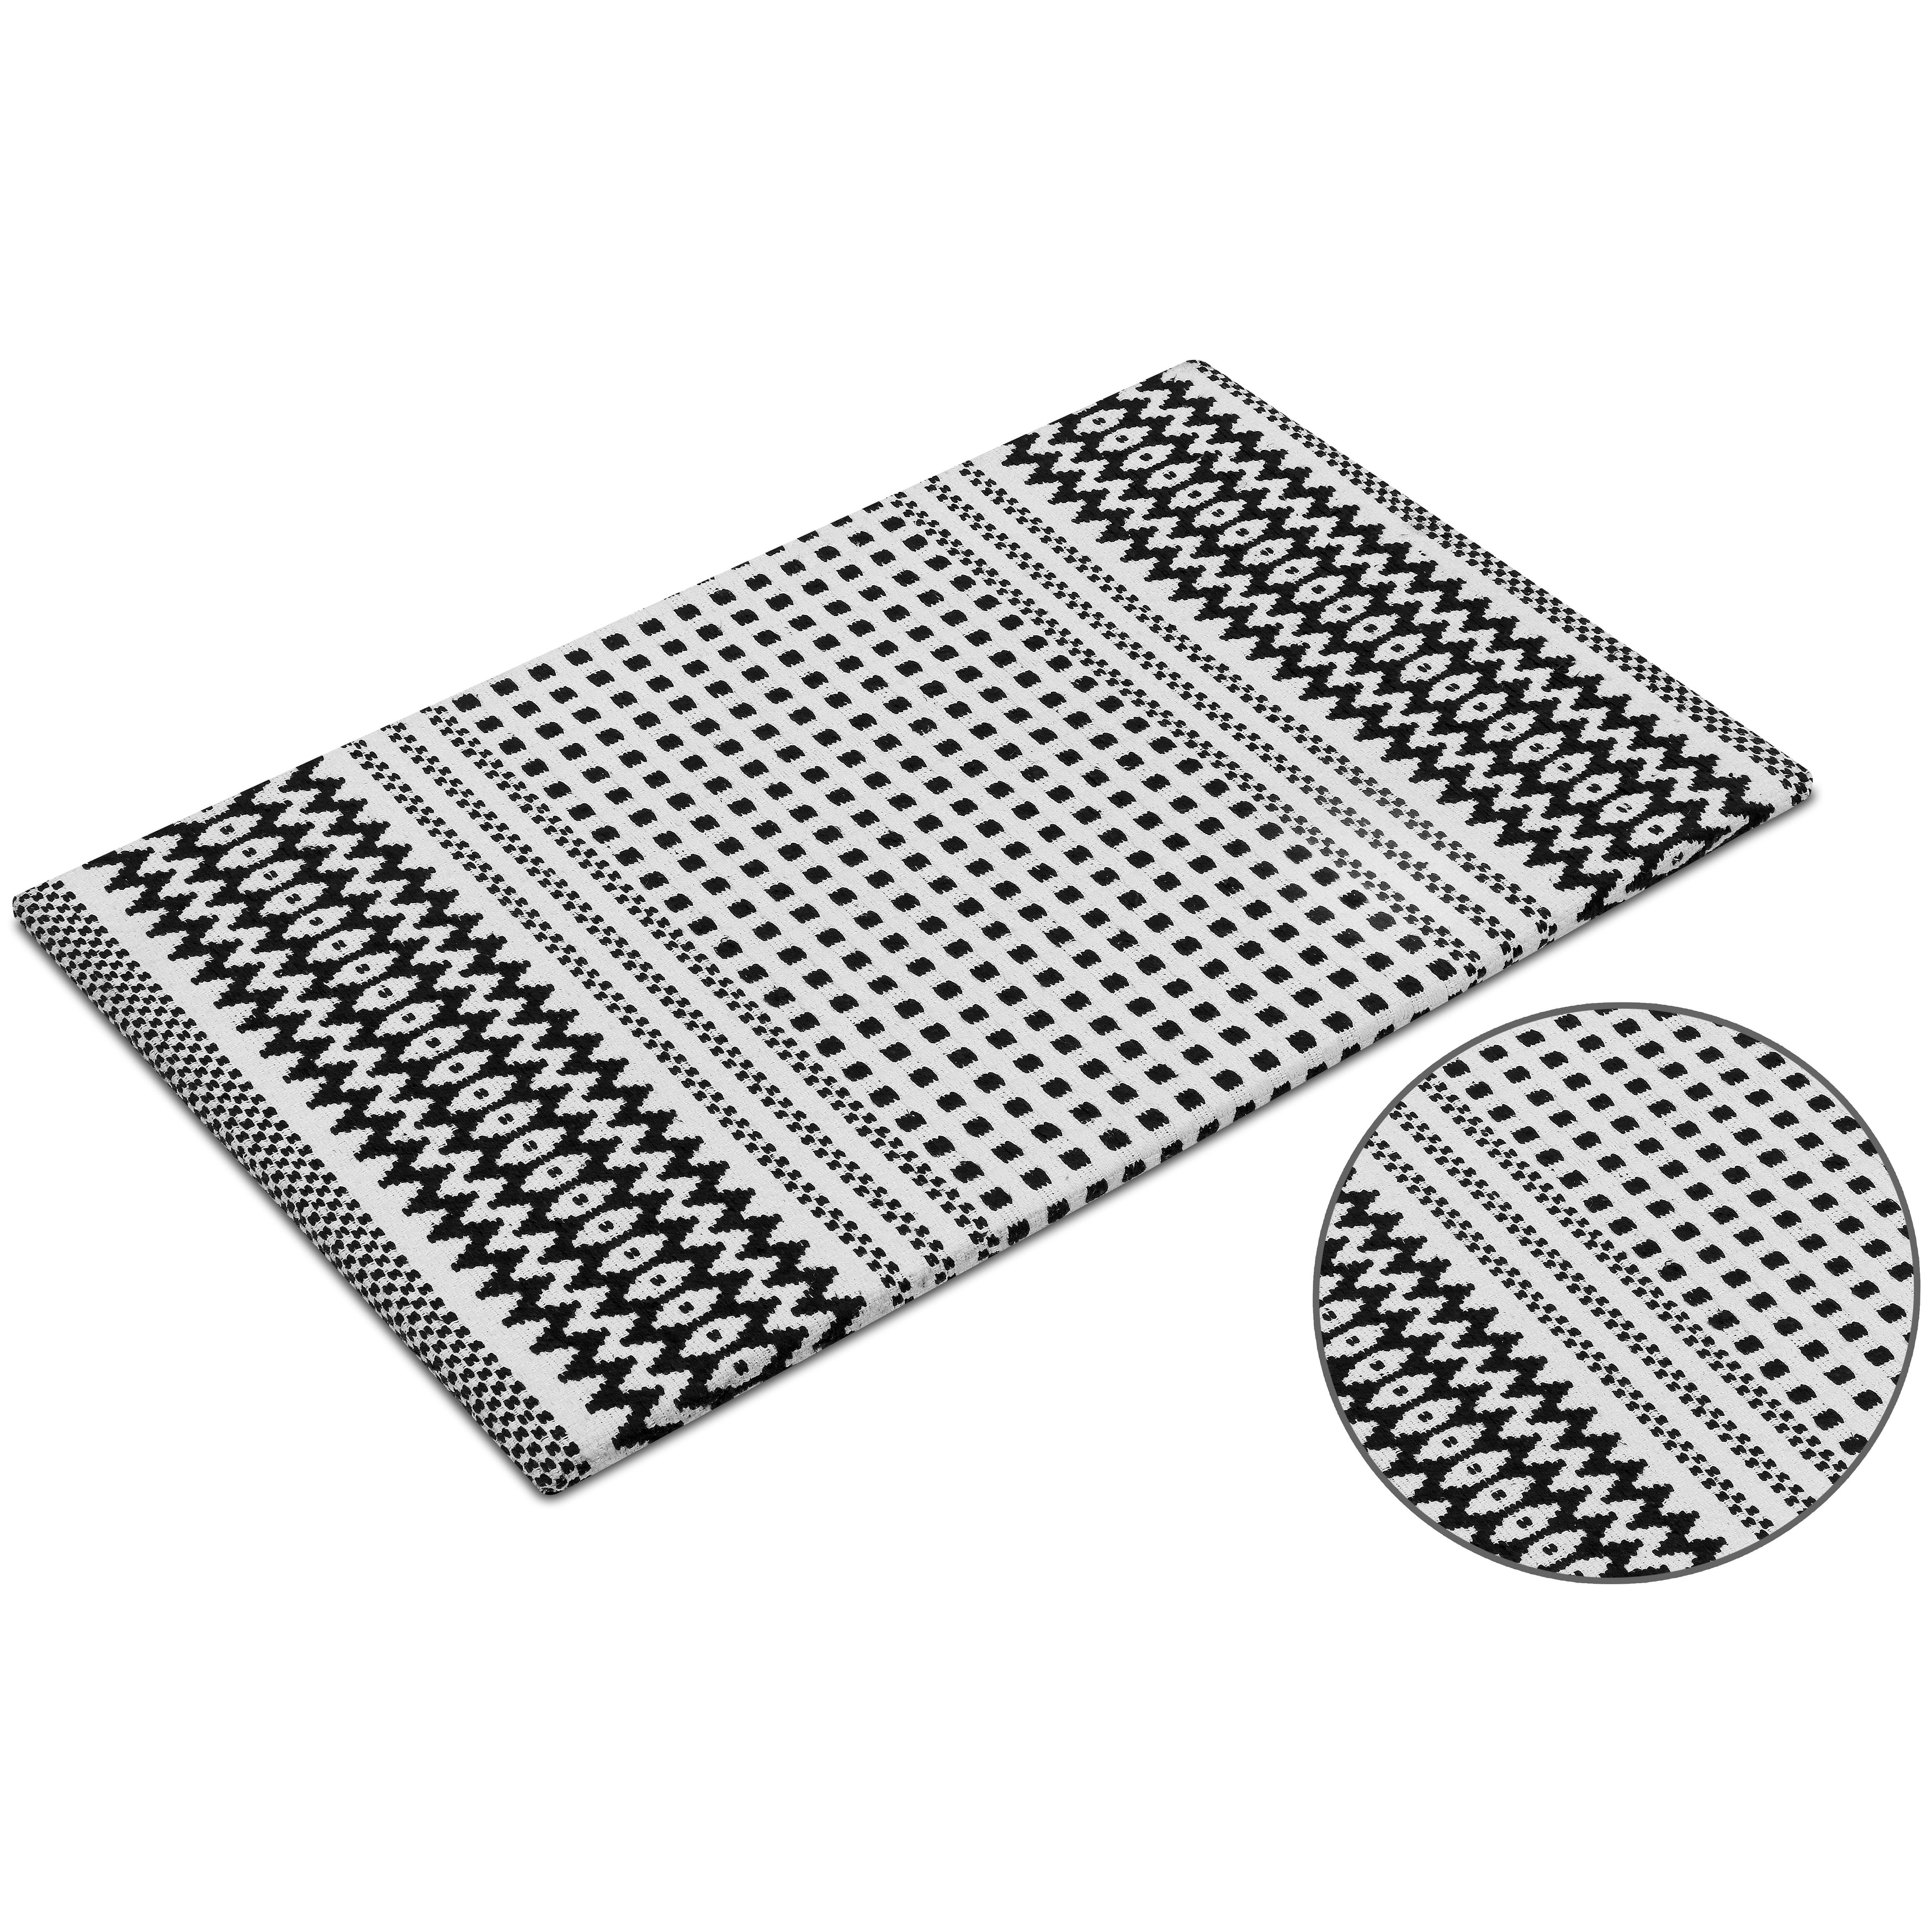 https://ak1.ostkcdn.com/images/products/is/images/direct/bc1f246f816a914f93b3fd3eb53ee318ce5e2369/Kitchen-Mat-Cushioned-Anti-Fatigue-Kitchen-Rug%2C-Non-Slip-Mats-Comfort-Foam-Rug-for-Kitchen%2C-Office%2C-Sink%2C-Laundry---18%27%27x30%27%27.jpg